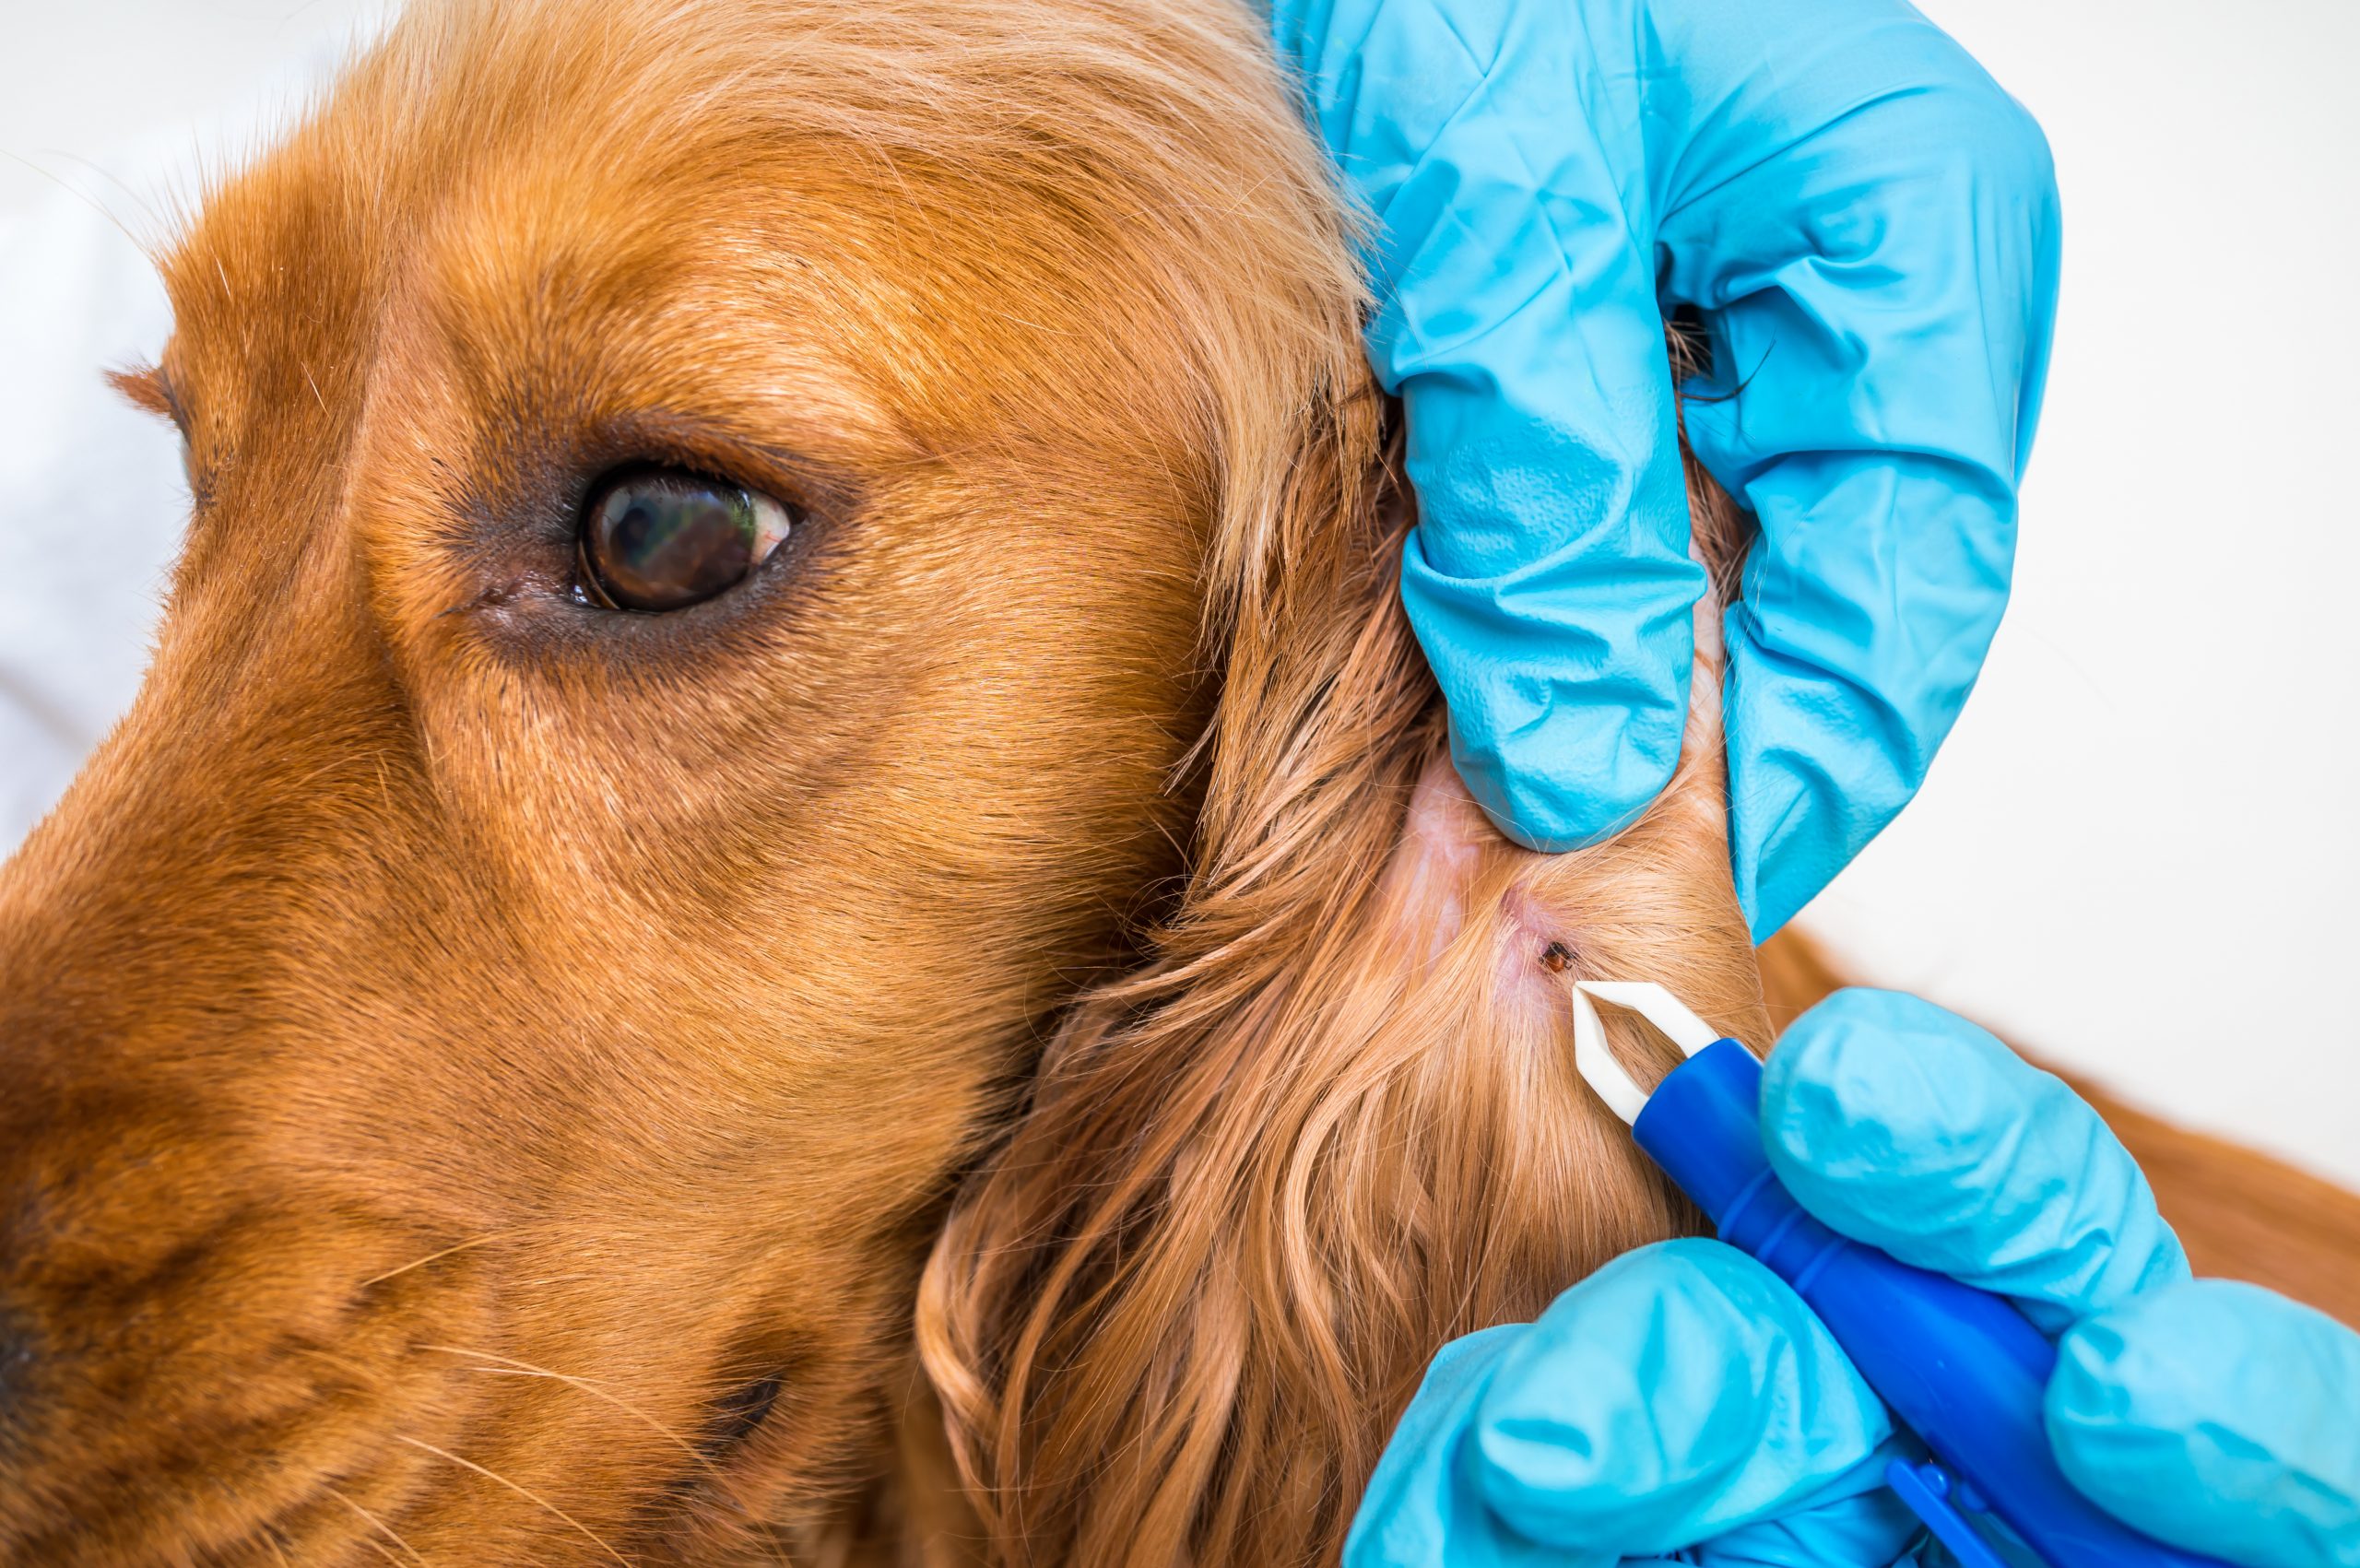 Veterinarian removing a tick from the Cocker Spaniel dog